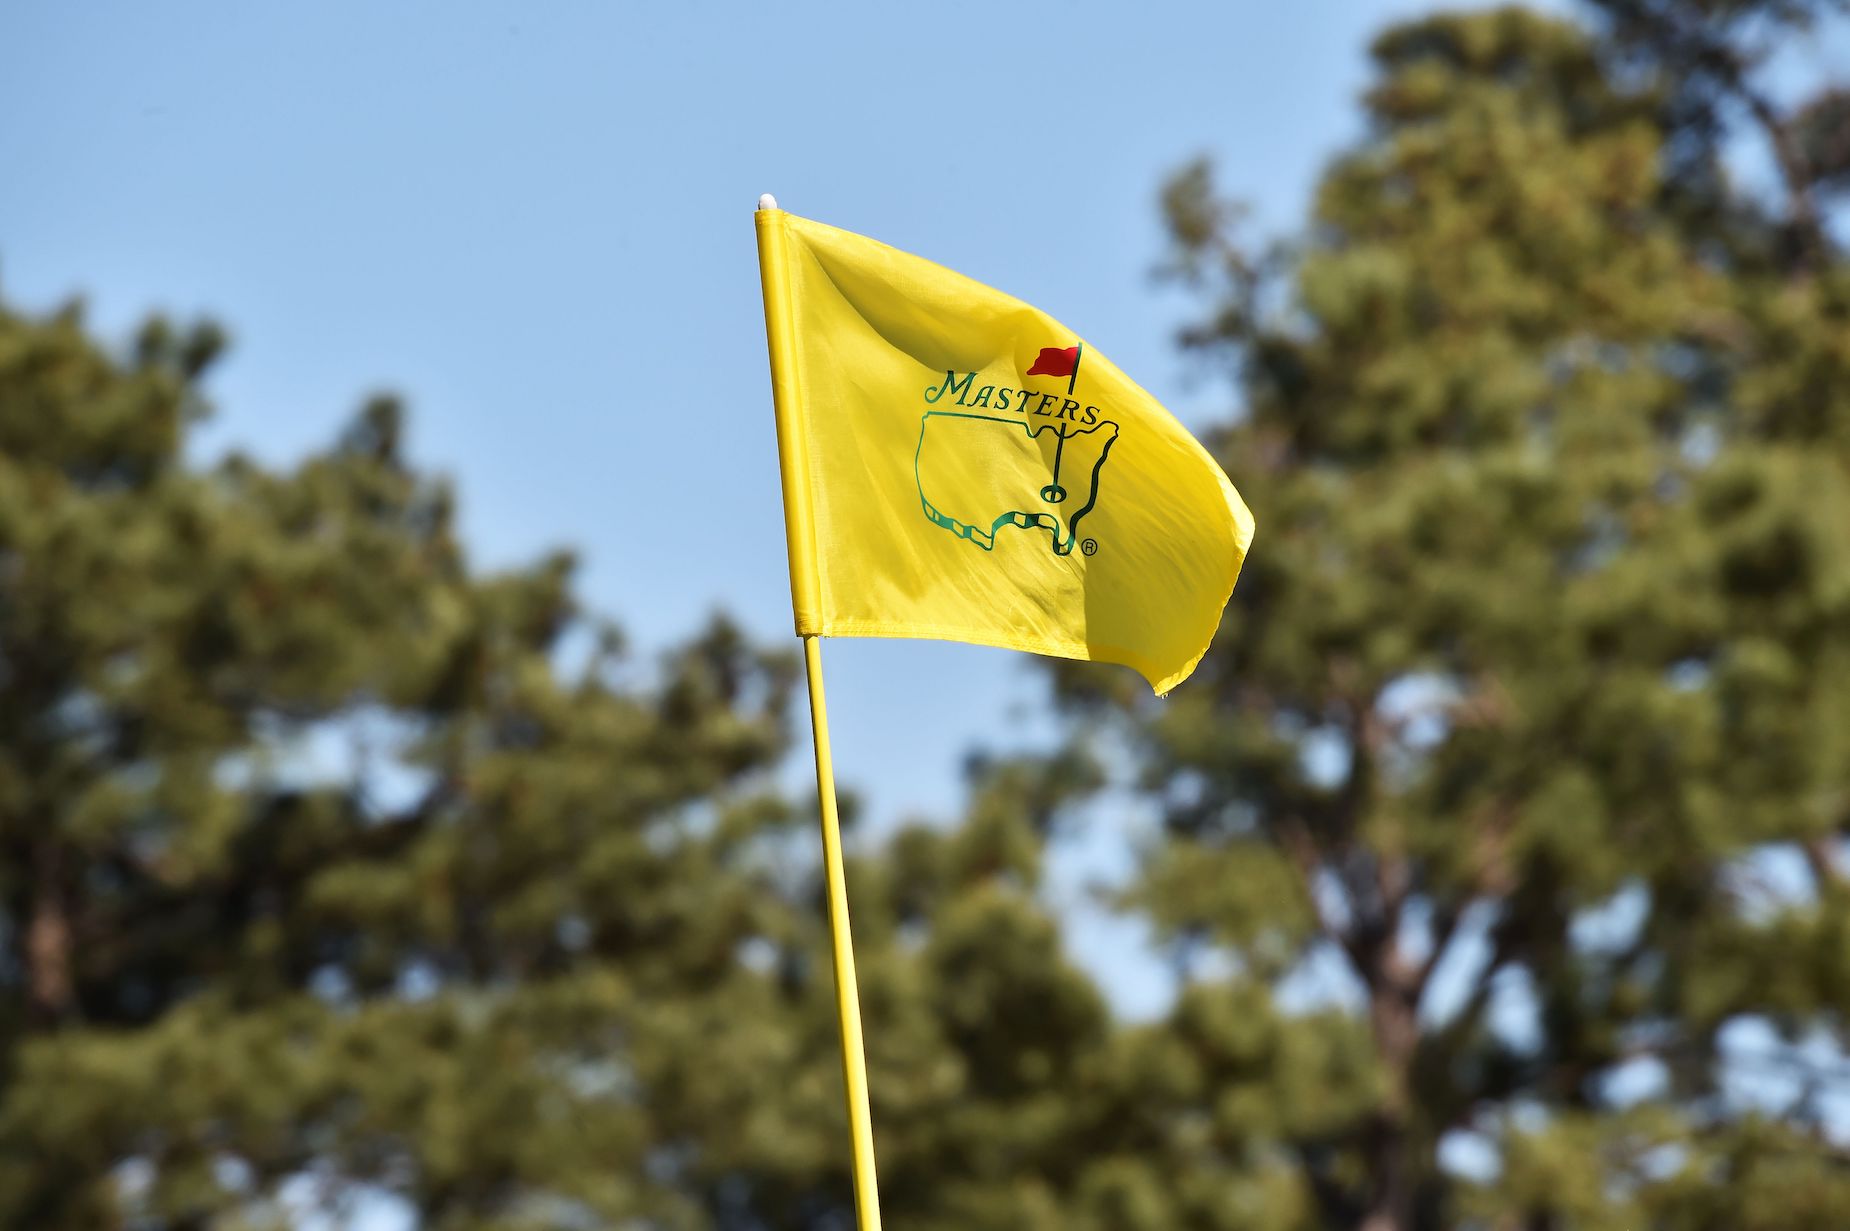 The Masters logo is seen on a flag during the 2016 tournament.